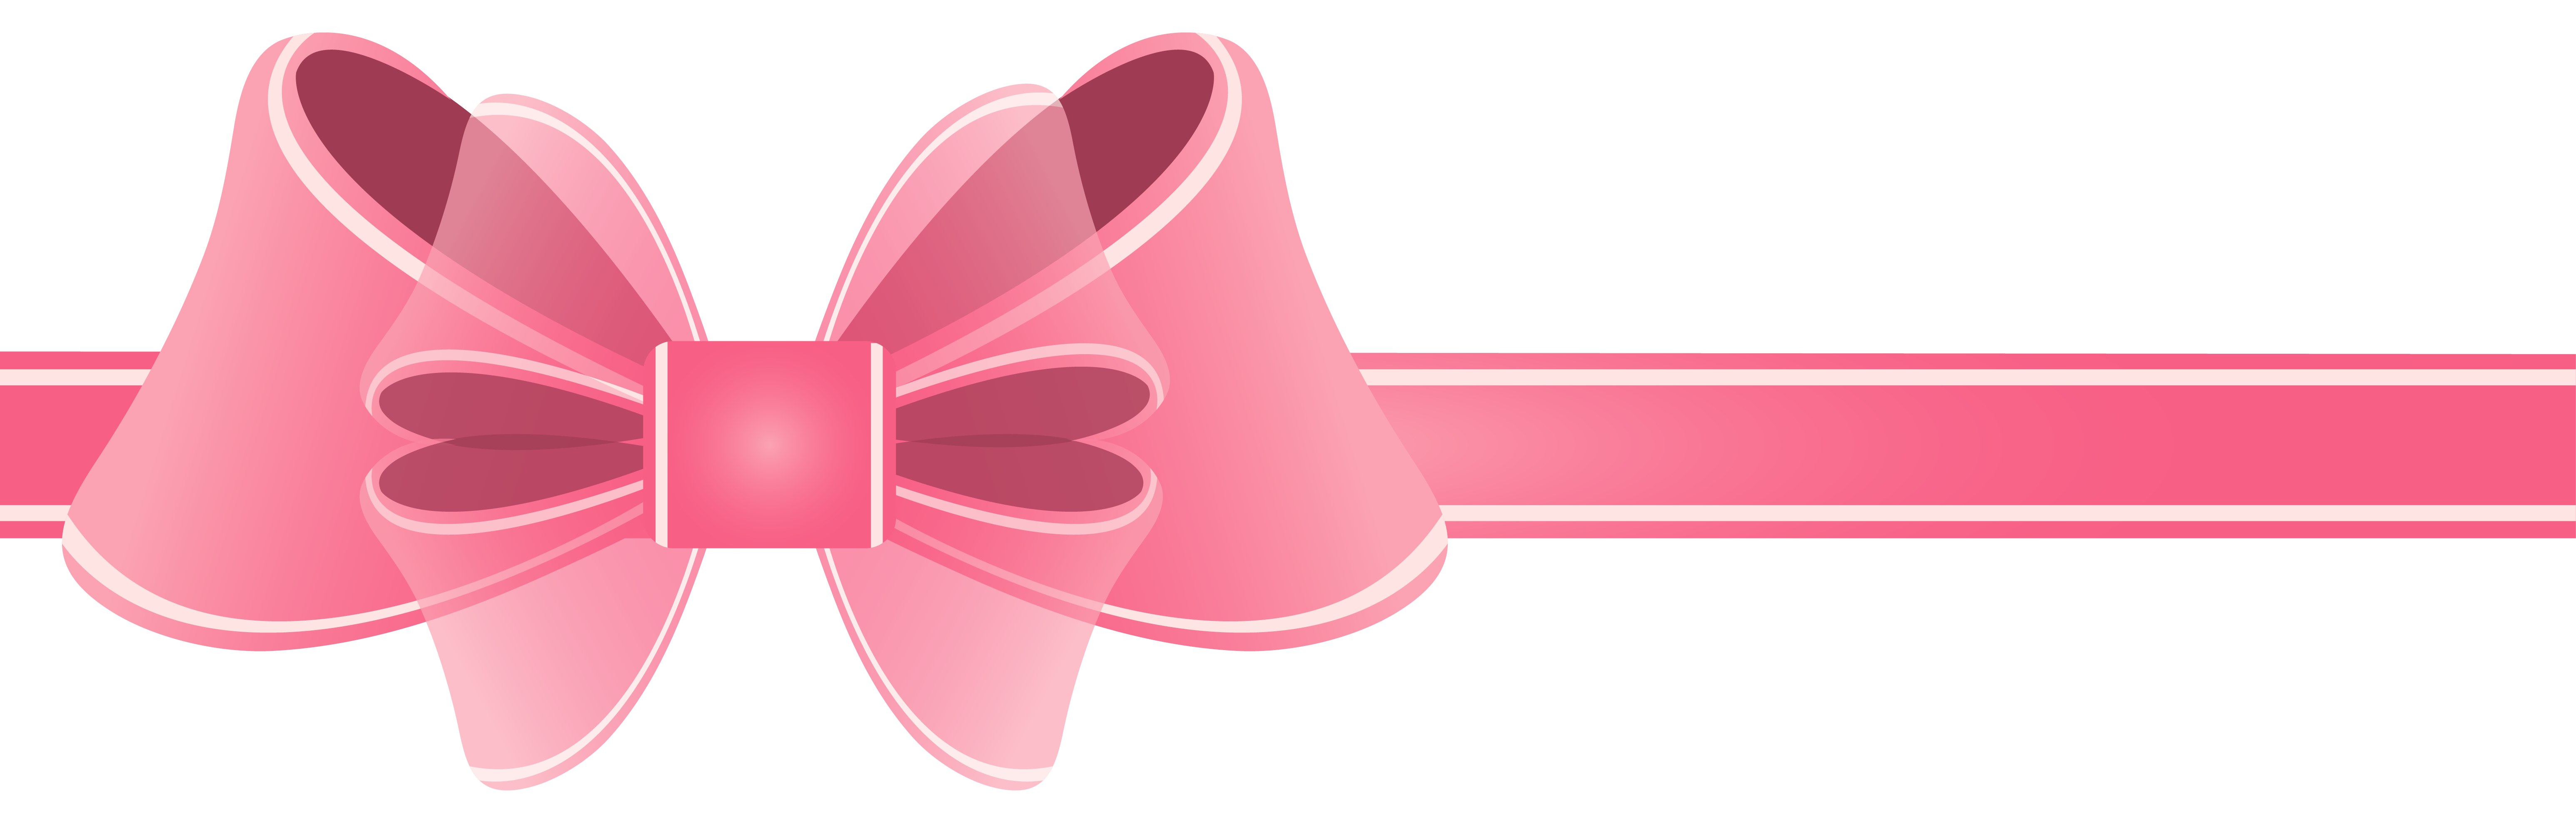 Pink Ribbon PNG Clipart Picture​ | Gallery Yopriceville - High-Quality Free  Images and Transparent PNG Clipart